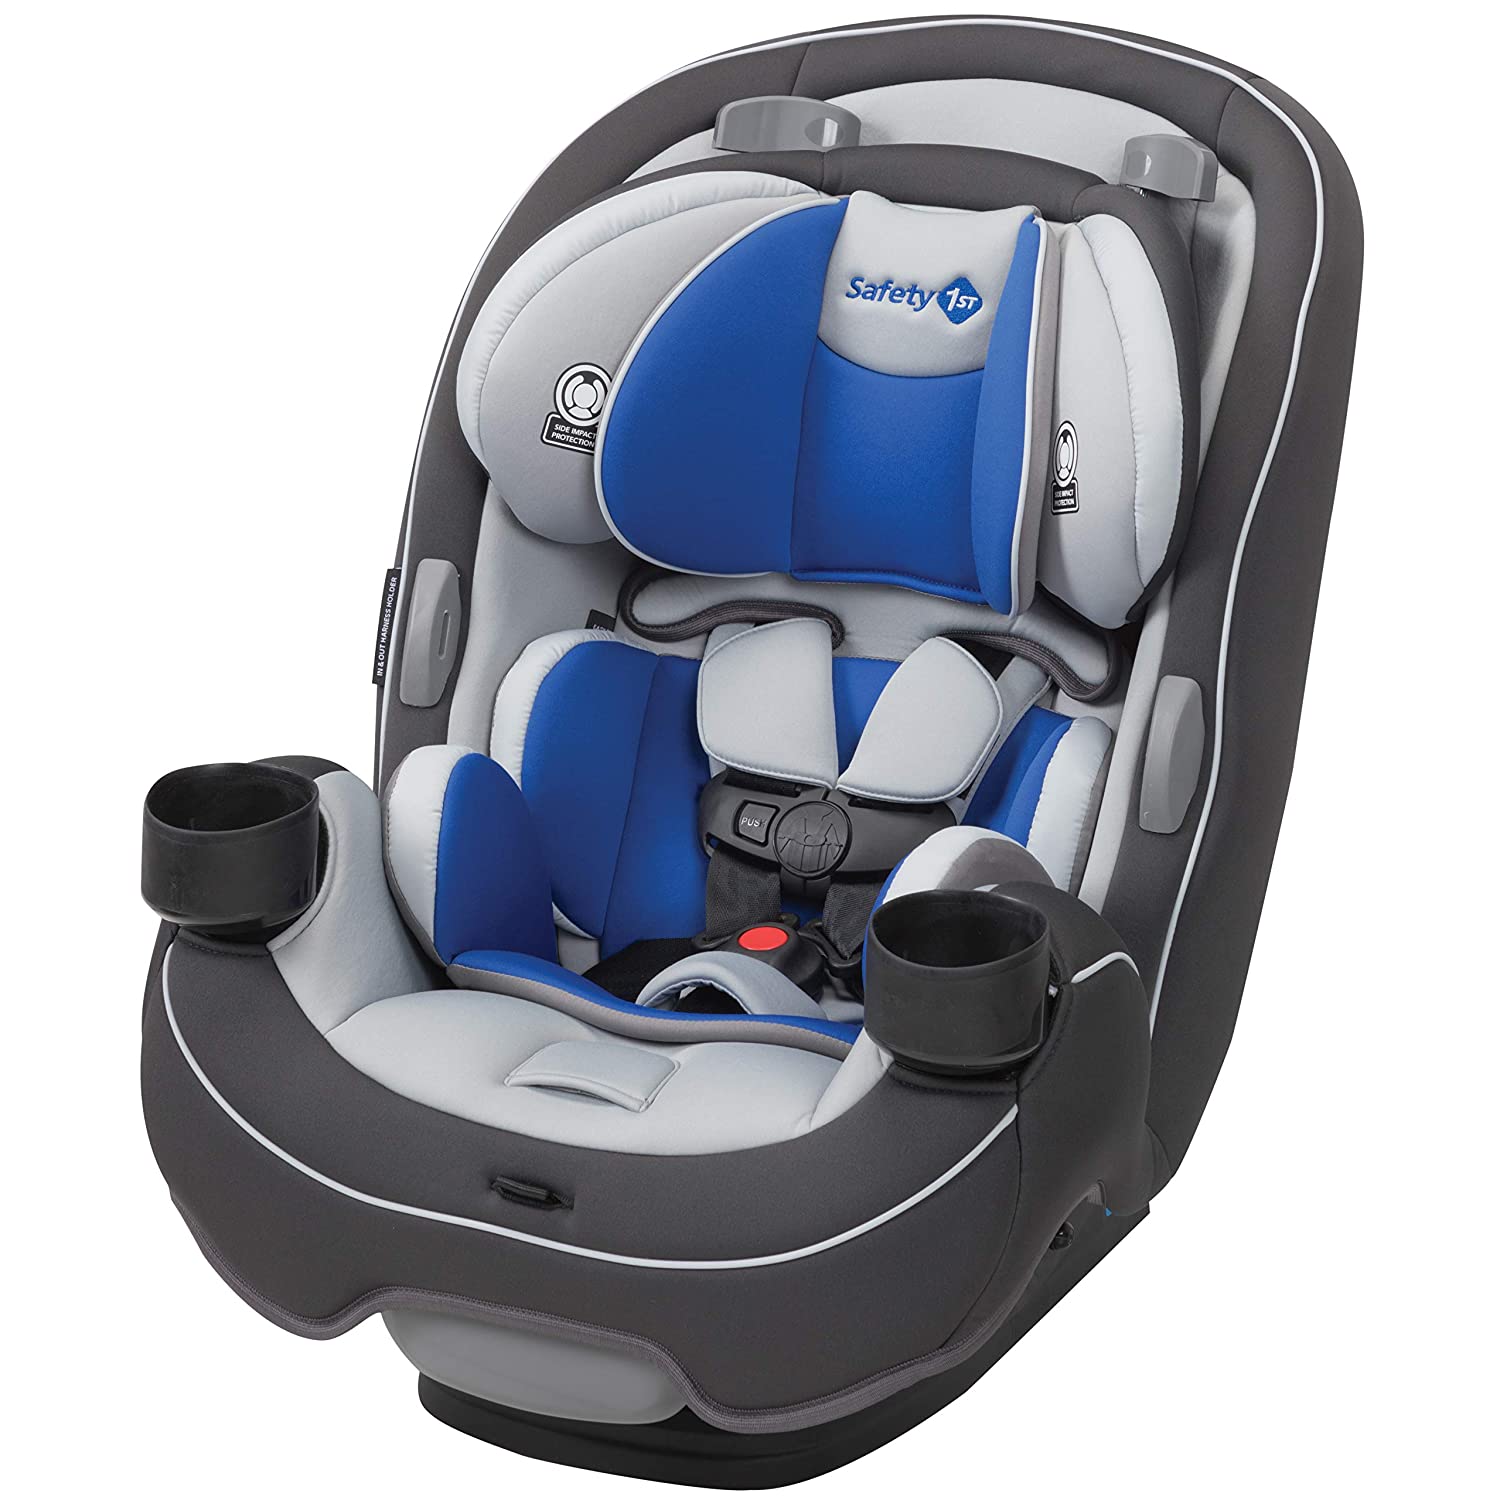 Safety 1st Grow and Go 3-in-1 Convertible Car Seat, Carbon Wave